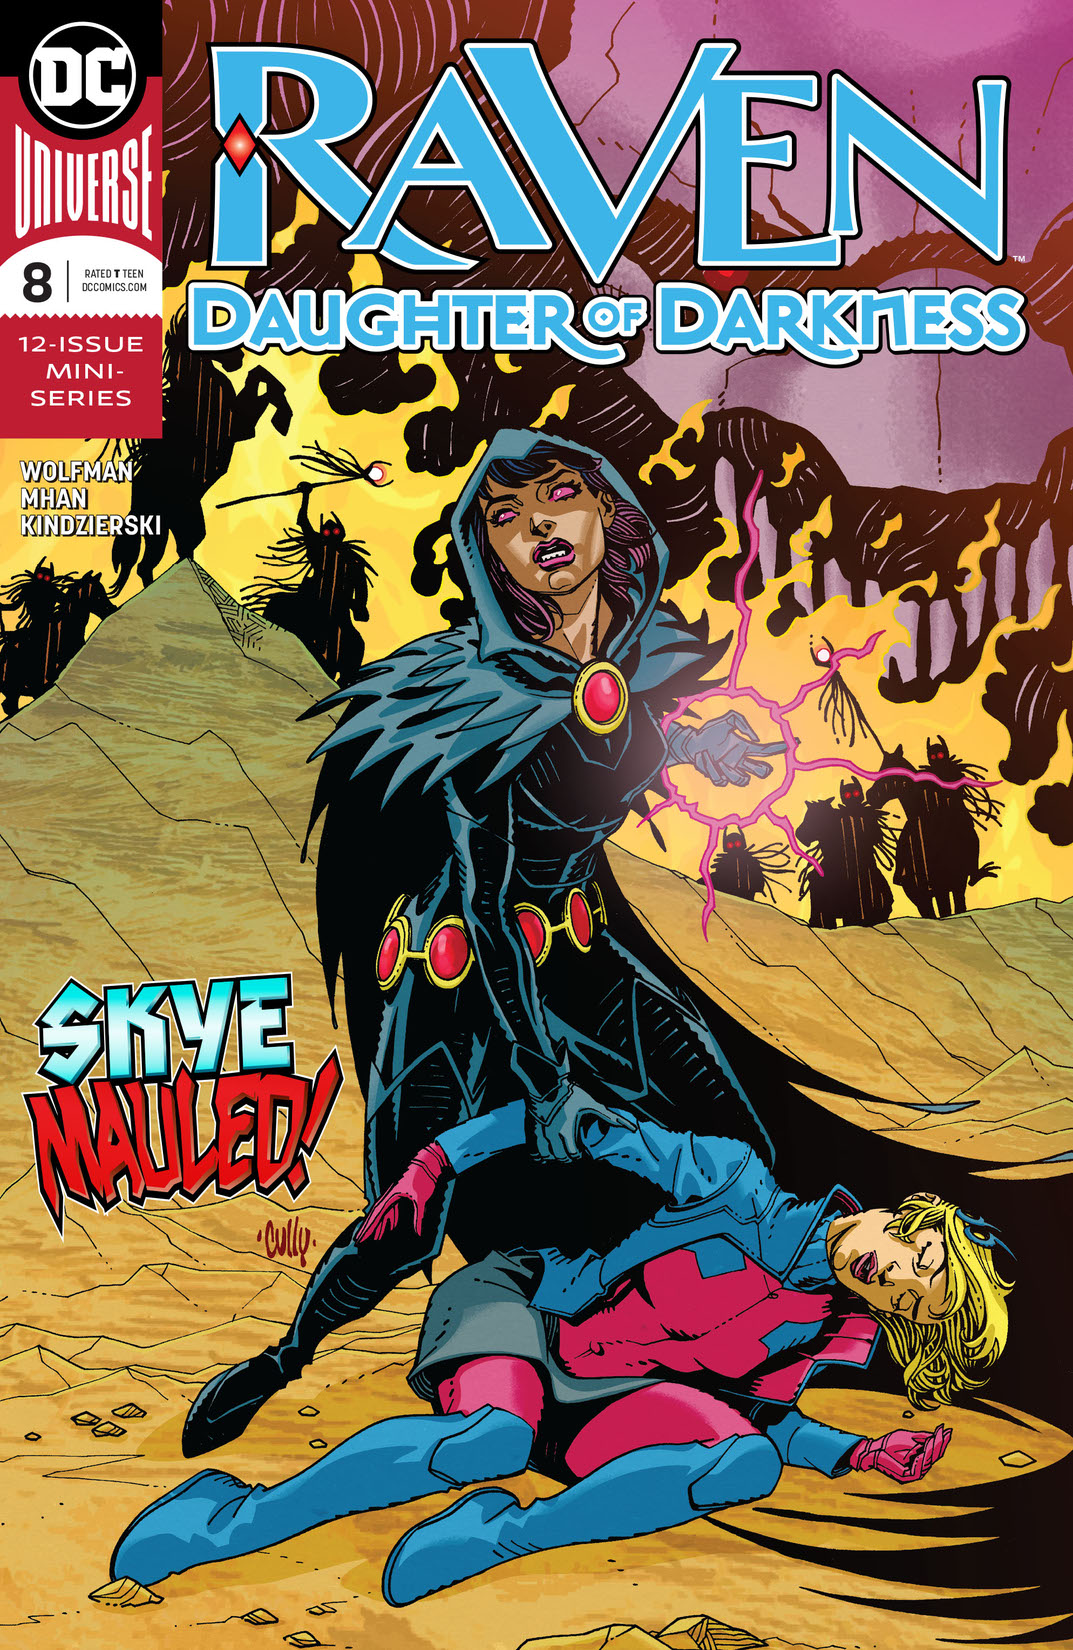 Raven: Daughter of Darkness #8 preview images